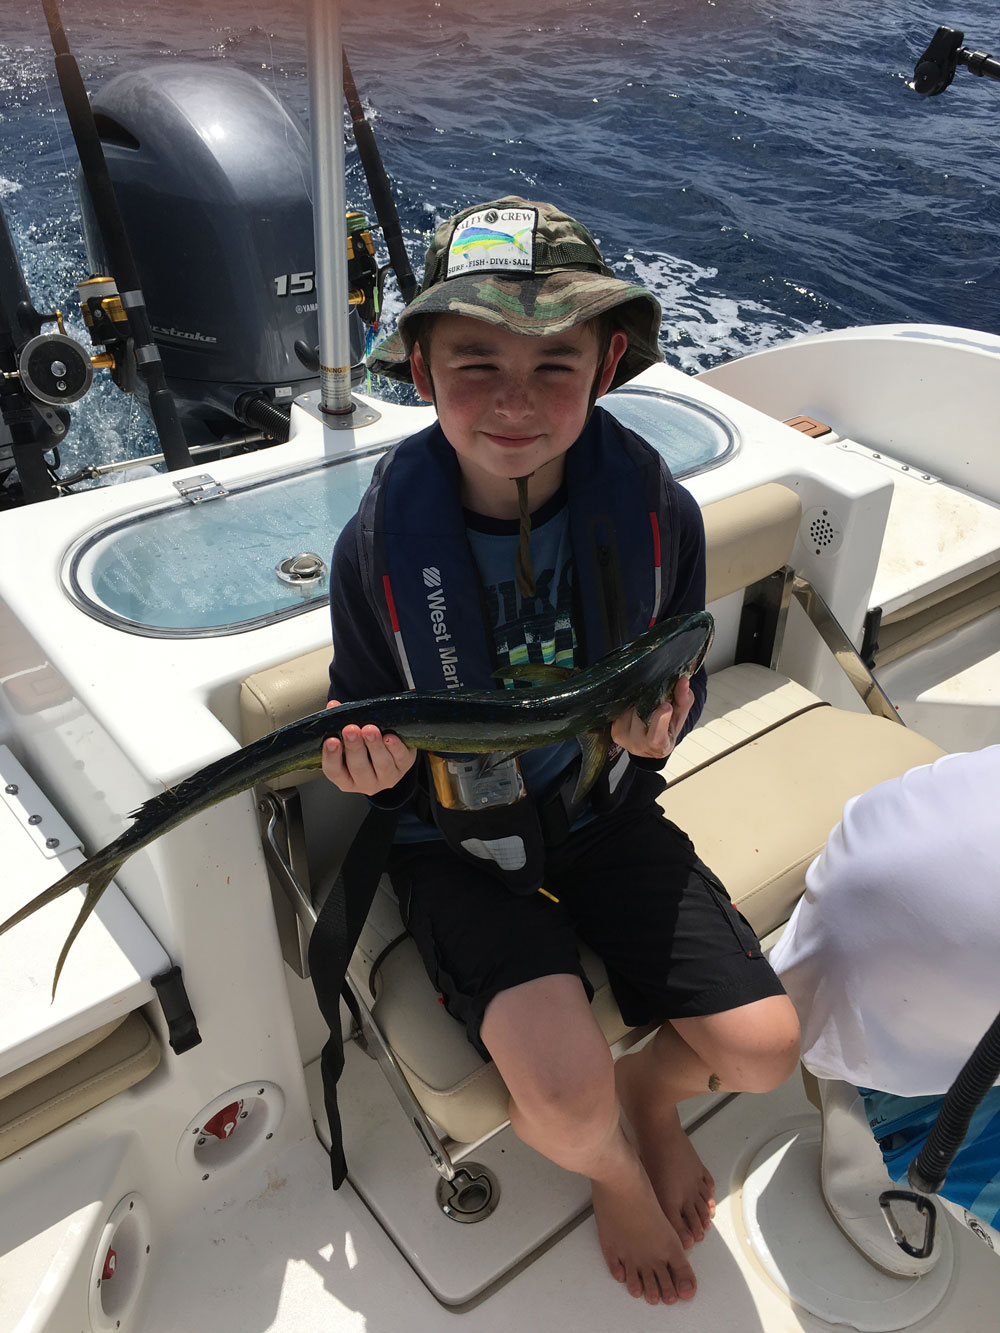 Boy sitting on the boat with dark colored fish in hands